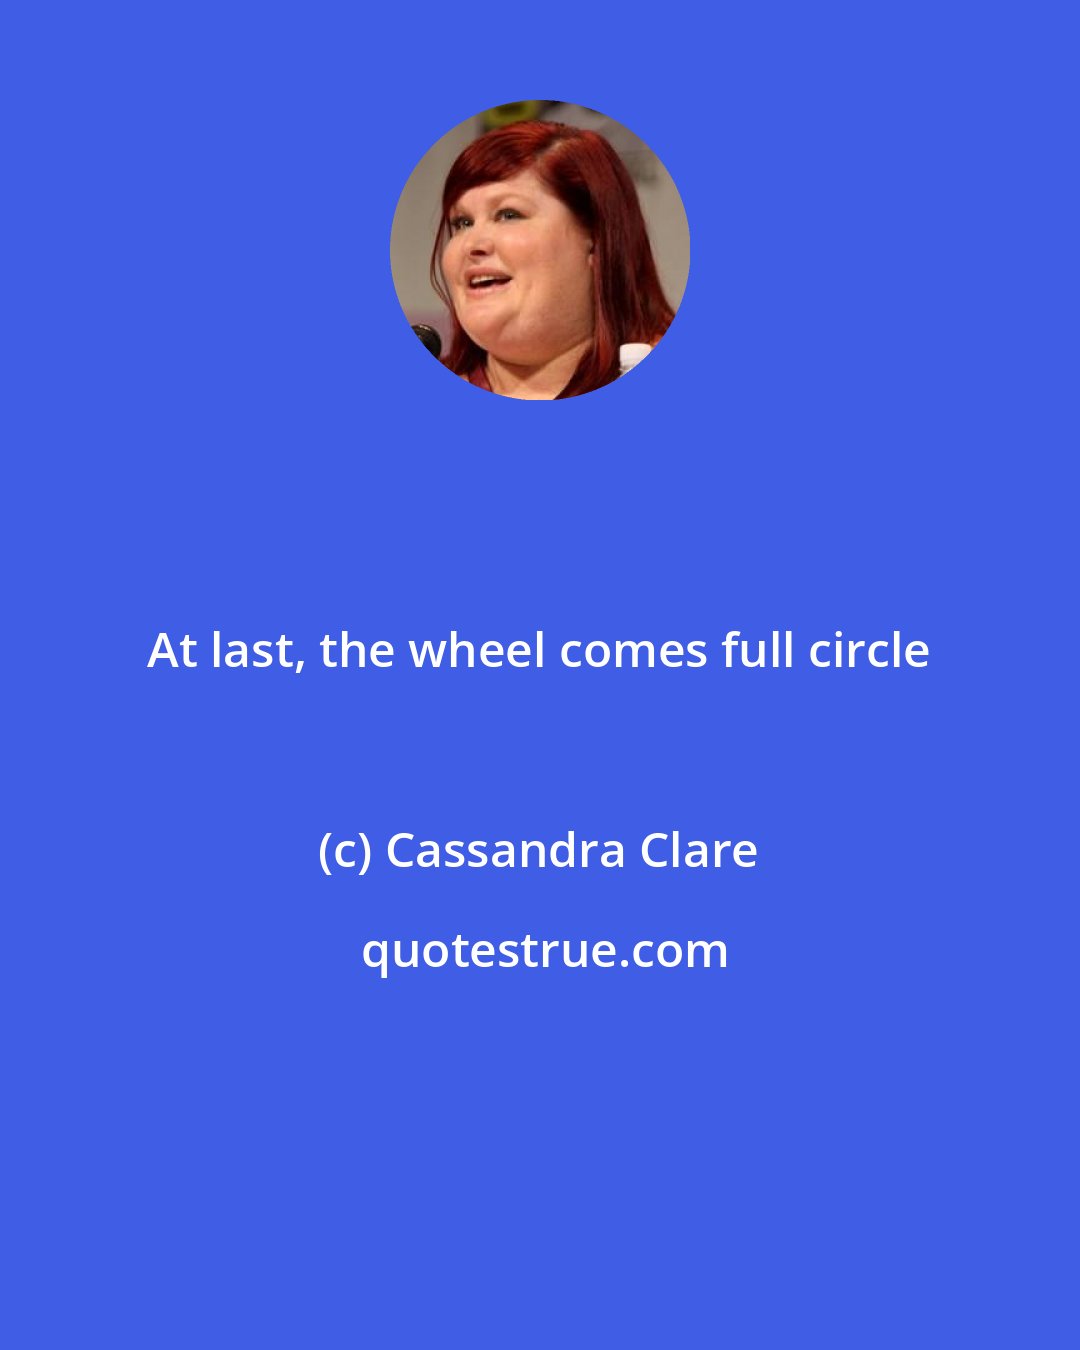 Cassandra Clare: At last, the wheel comes full circle